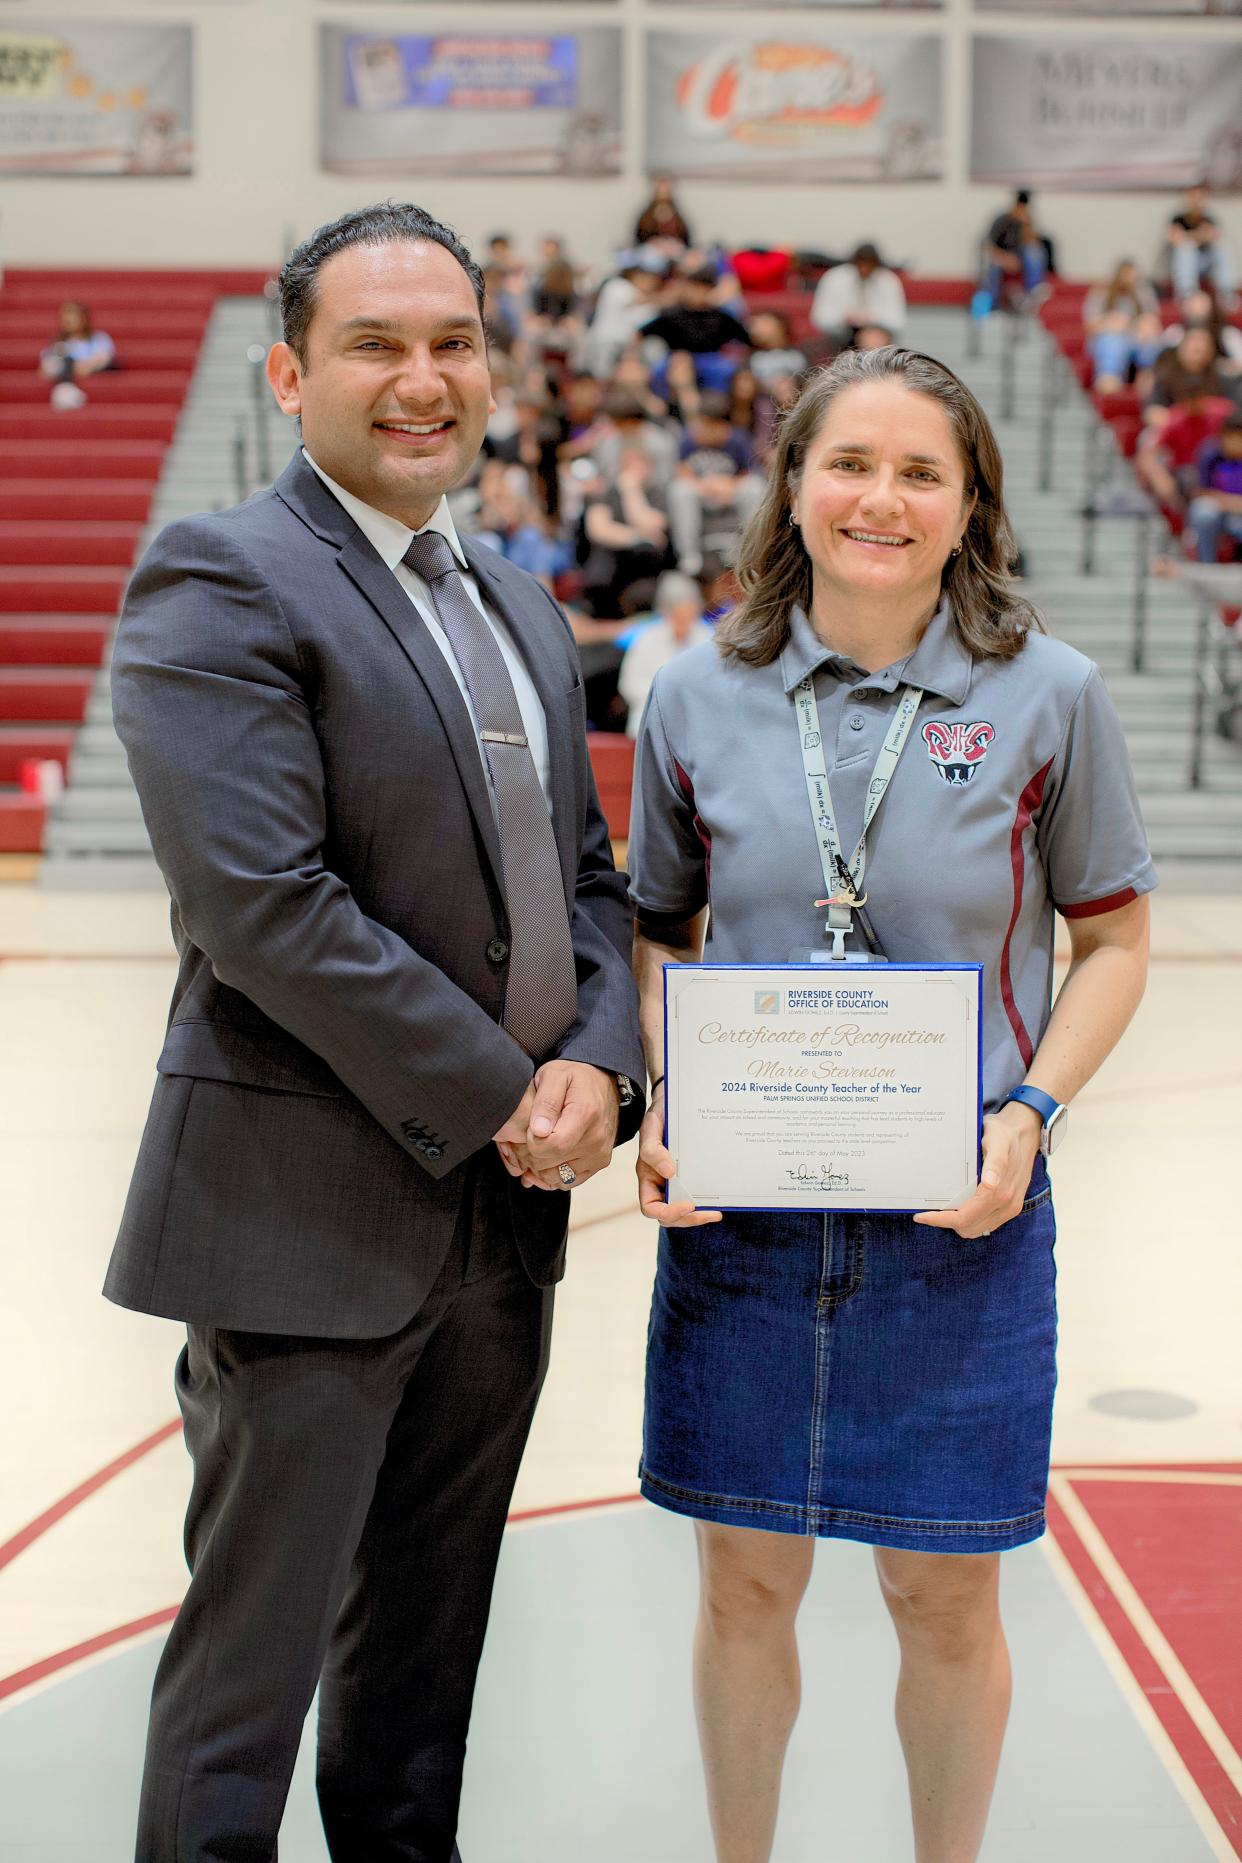 Rancho Mirage High School math teacher Marie Stevenson is named a Riverside County Teacher of the Year in a surprise announcement by Riverside County Superintendent of Schools Edwin Gomez in Rancho Mirage, Calif., on May 26, 2023.